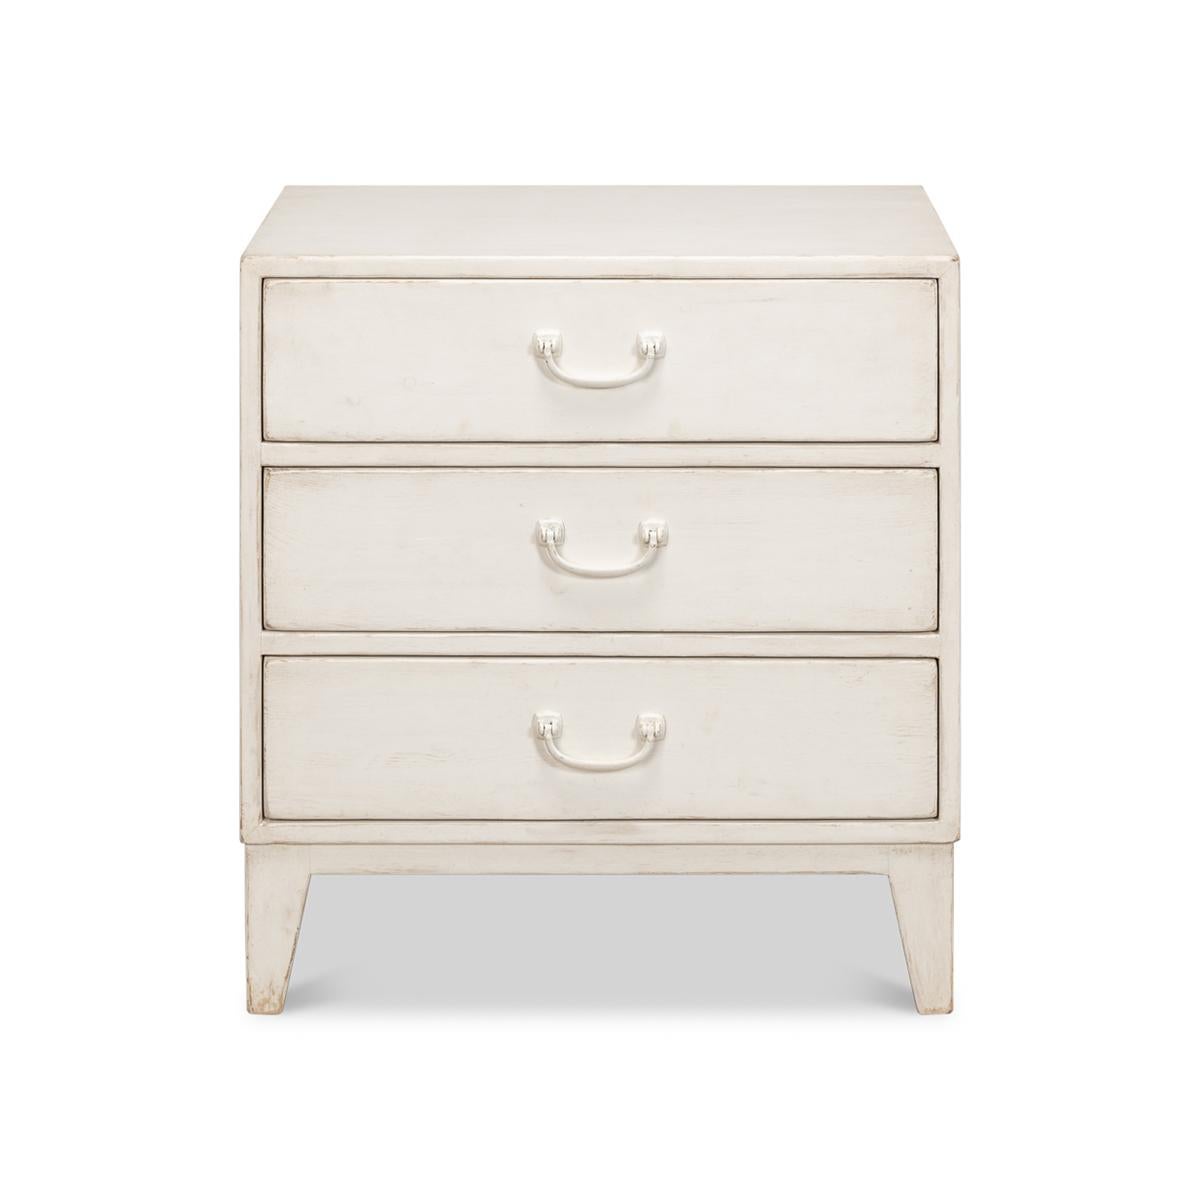 With its creamy antique white finish and shapely, traditional silhouette, it brings a timeless charm to your decor. The three drawers are adorned with classic bail handles, offering both functionality and a quaint aesthetic. Its compact size makes